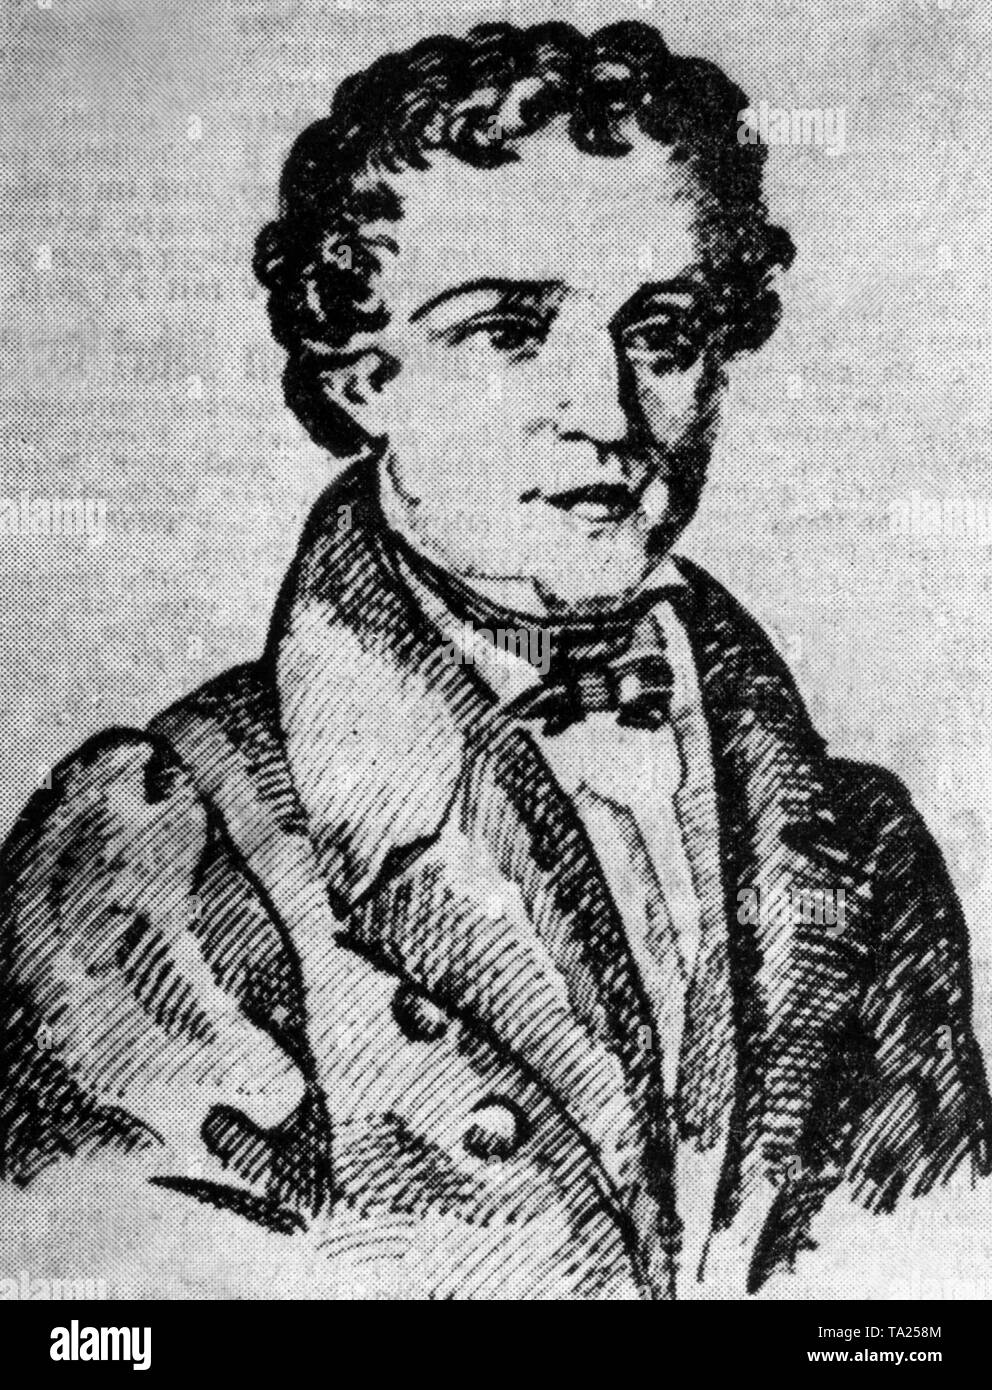 Kaspar Hauser on an engraving from the Nuremberg City Archives. Stock Photo